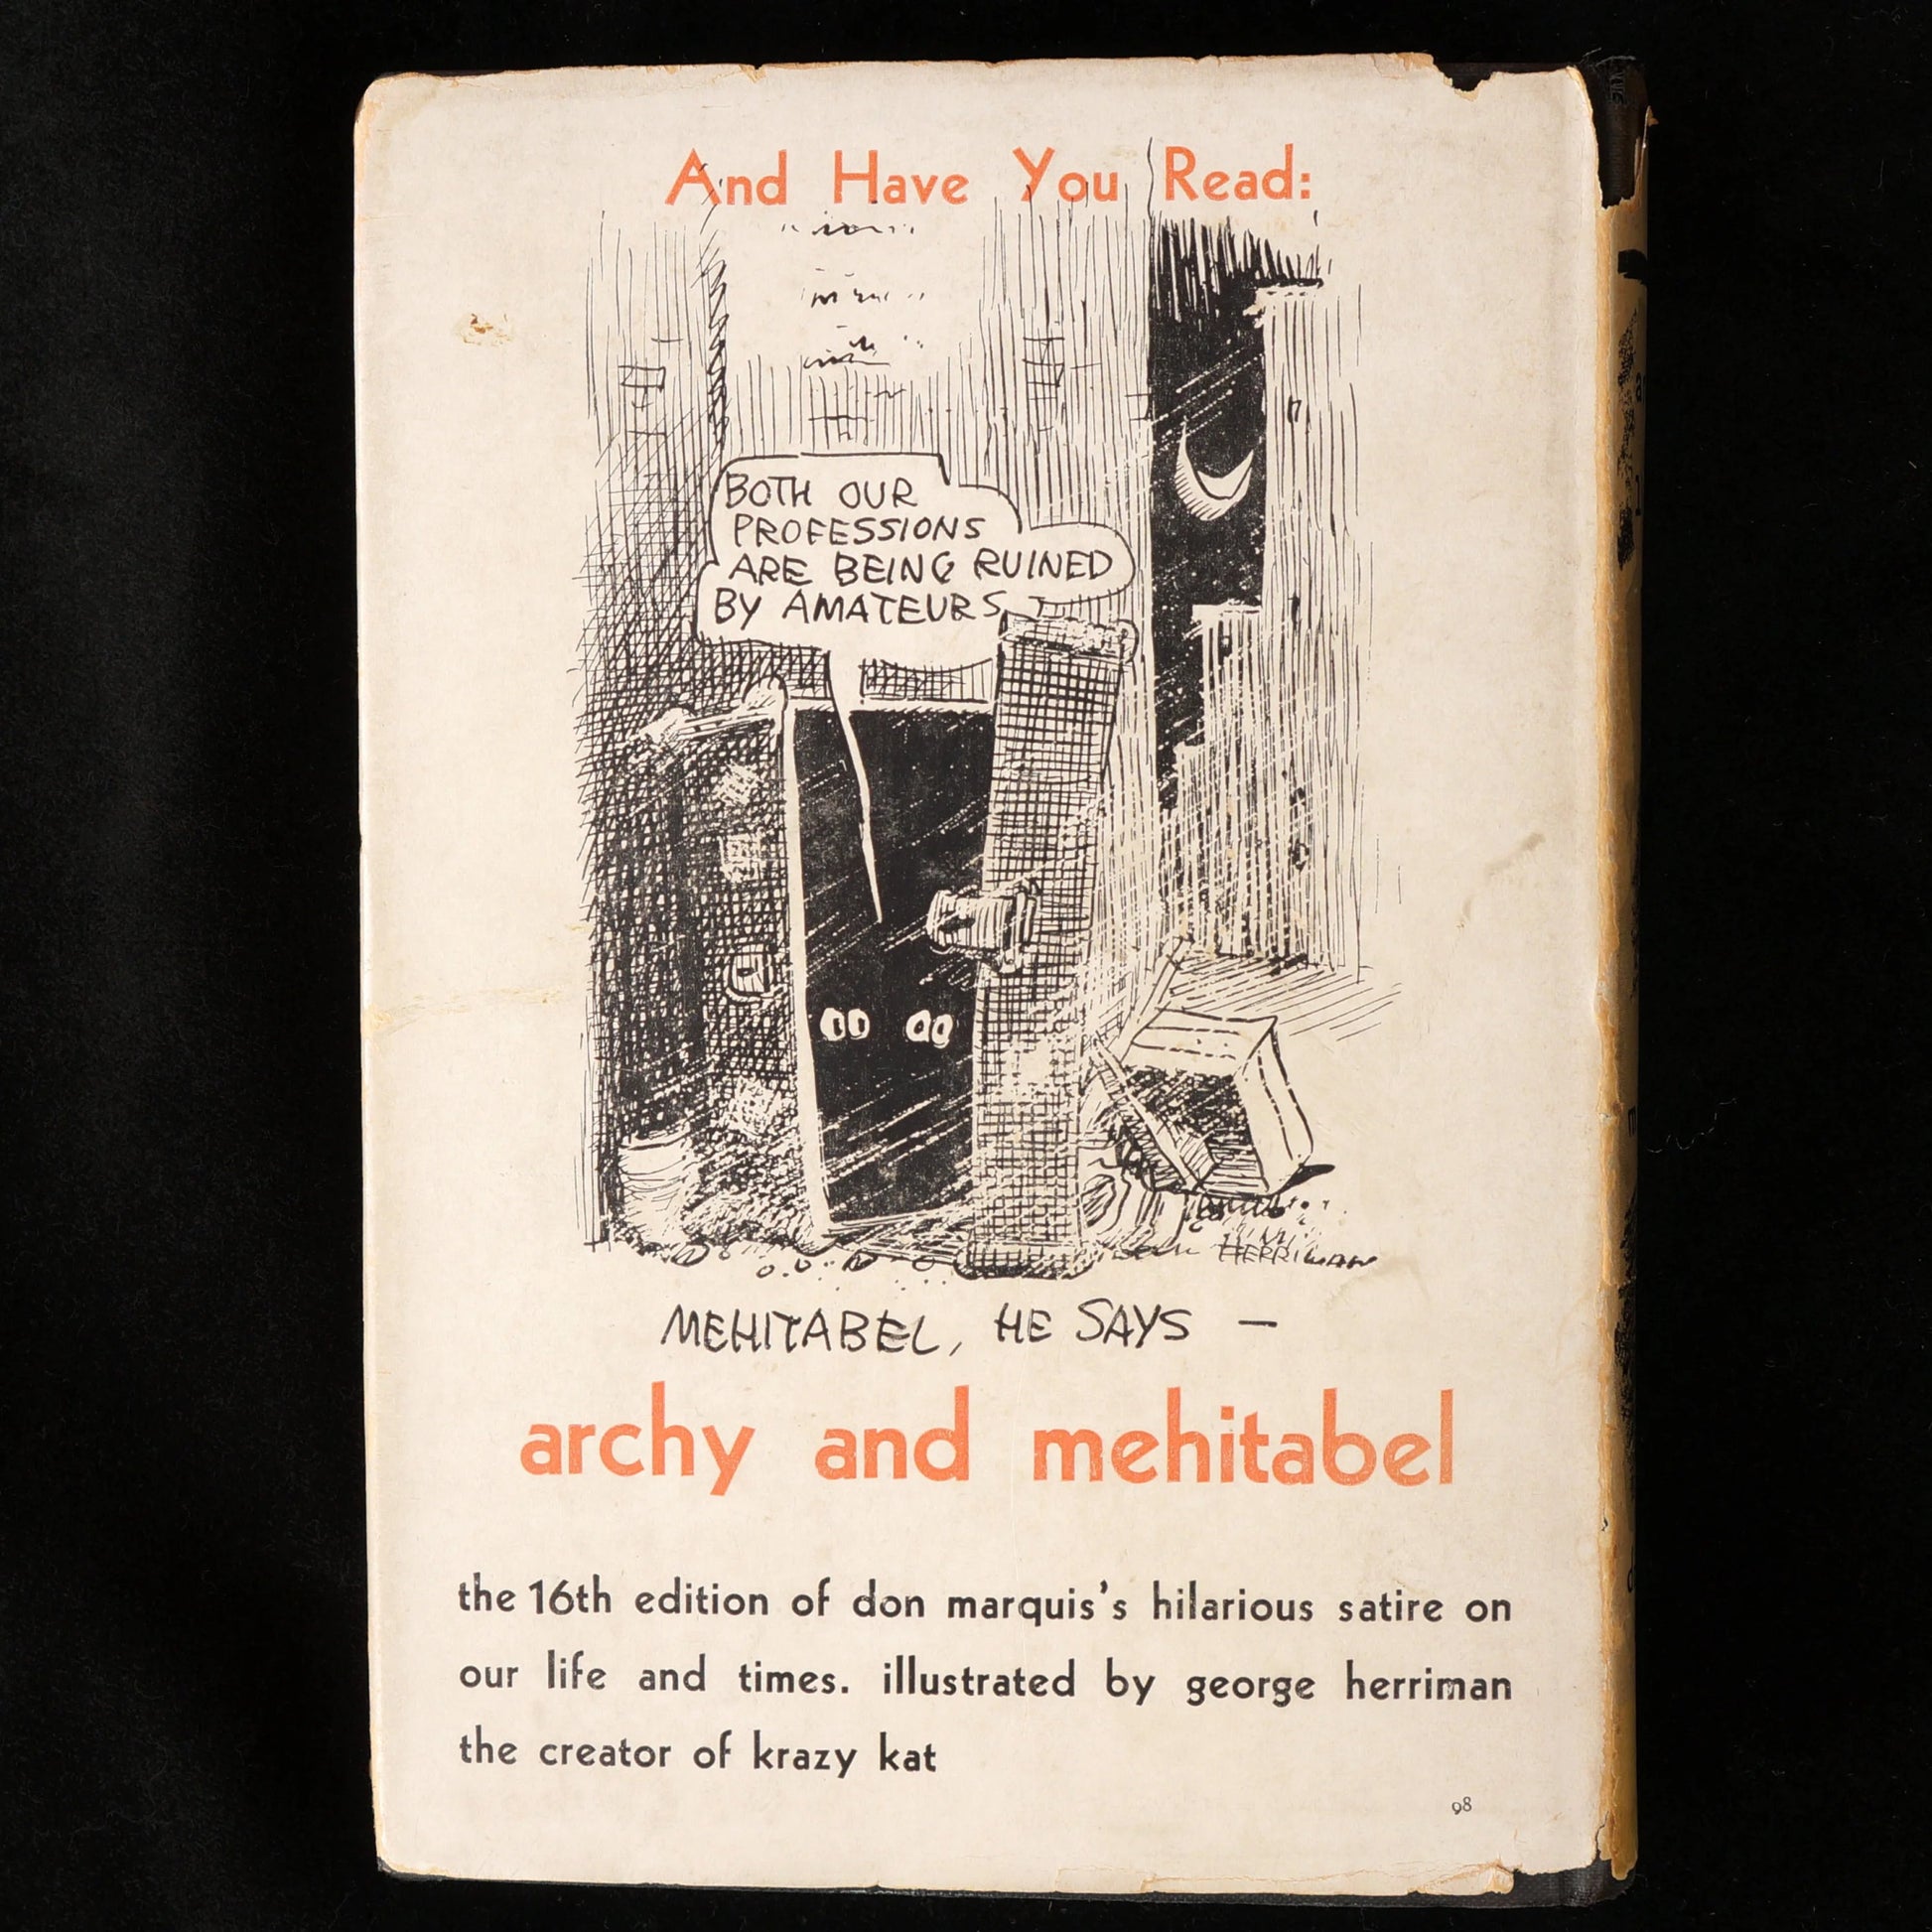 Archy's Life of Mehitabel, Don Marquis, First Edition - Bear and Raven Antiques